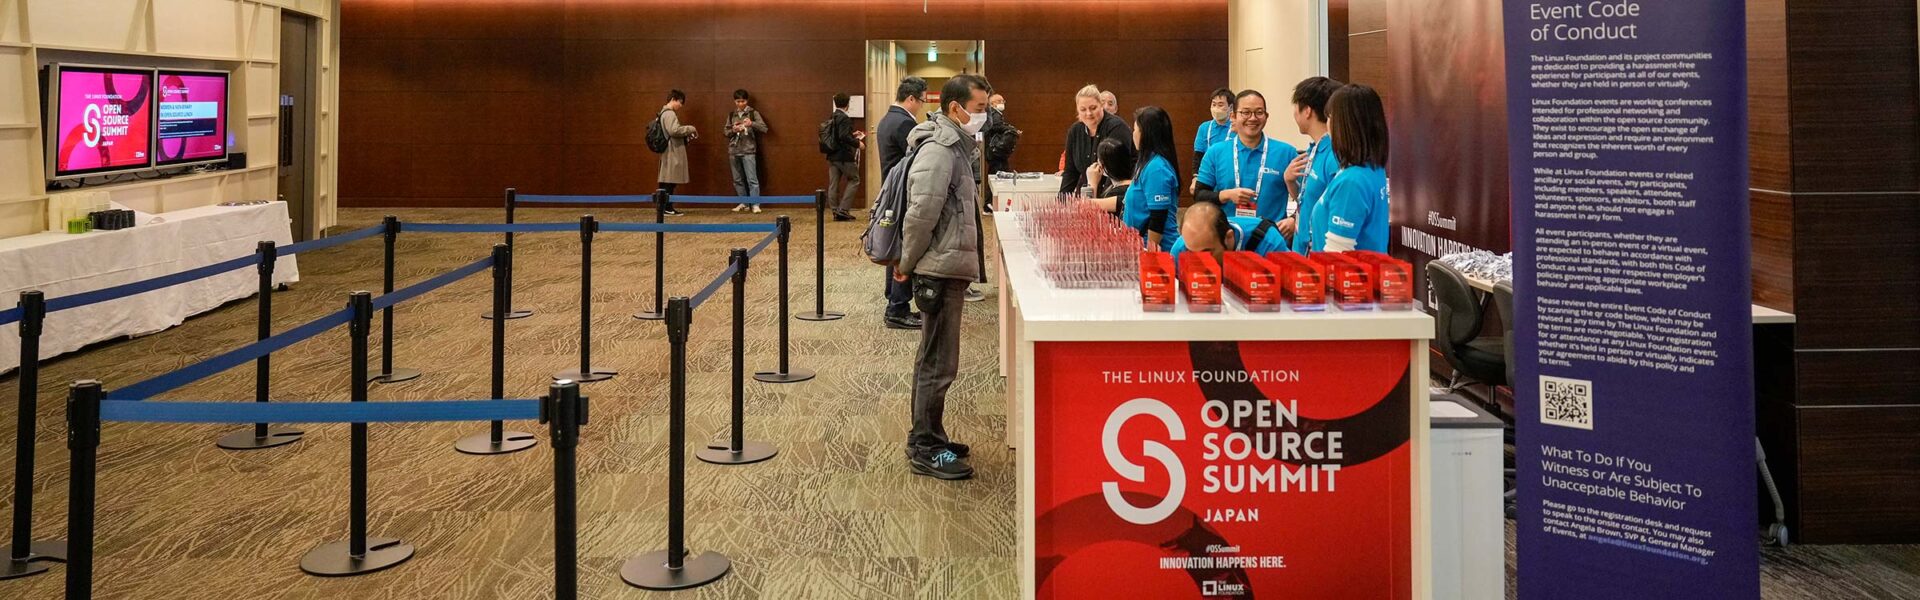 An attendee at the registration desk that says Open Soure Summit Japan.